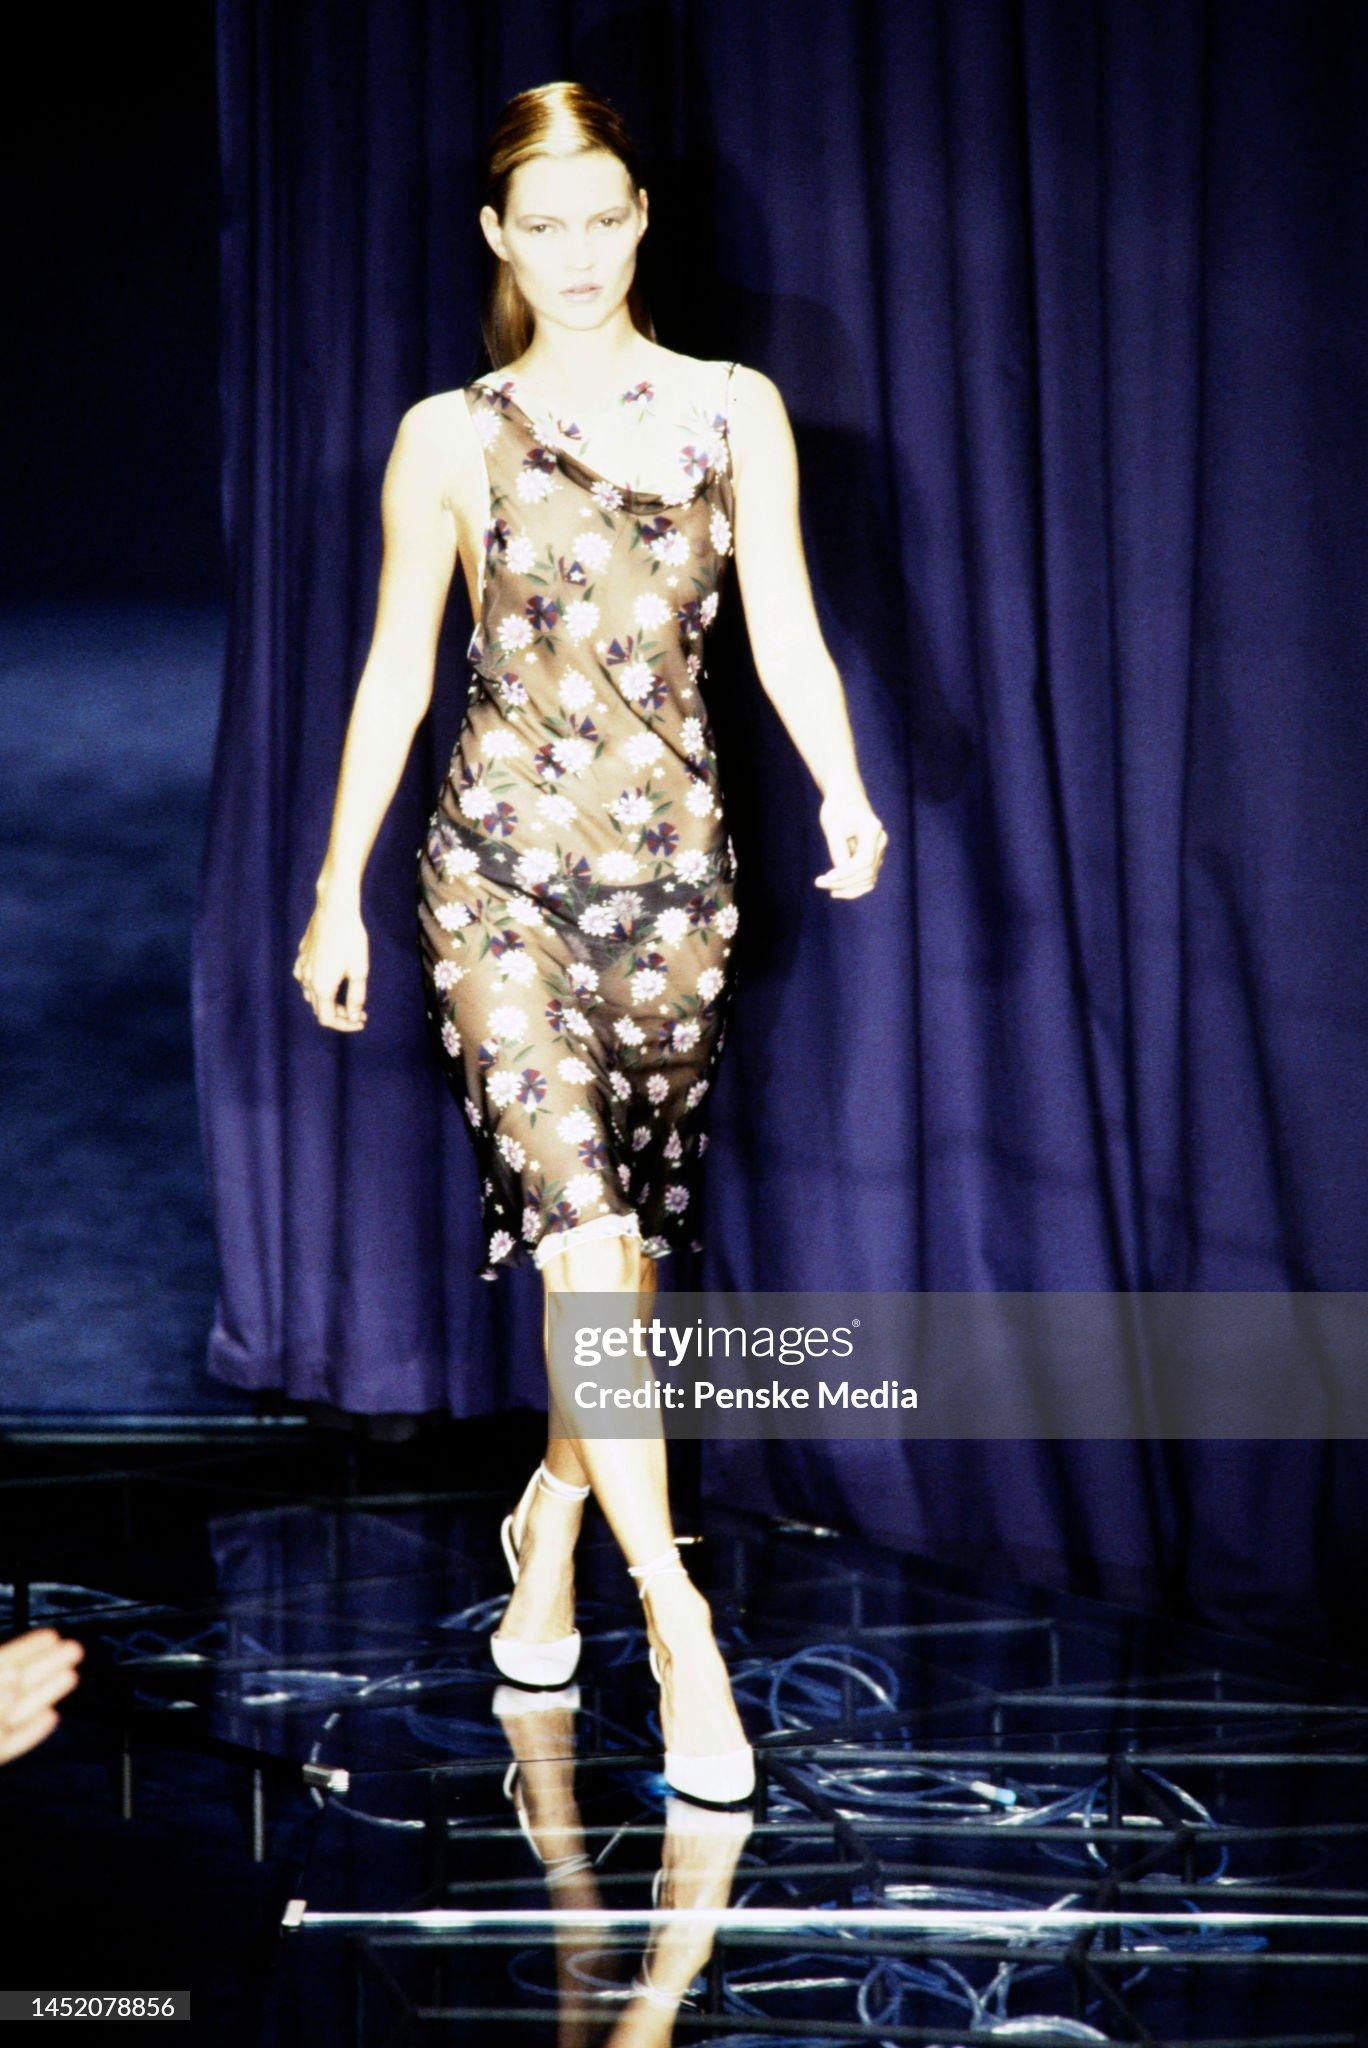 An incredibly chic and well documented Gianni Versace sheer double layered floral slip dress dating back to Donatella Versace's iconic 1998 spring-summer collection. Not only was this Donatella's debut collection but this rare dress was also modeled